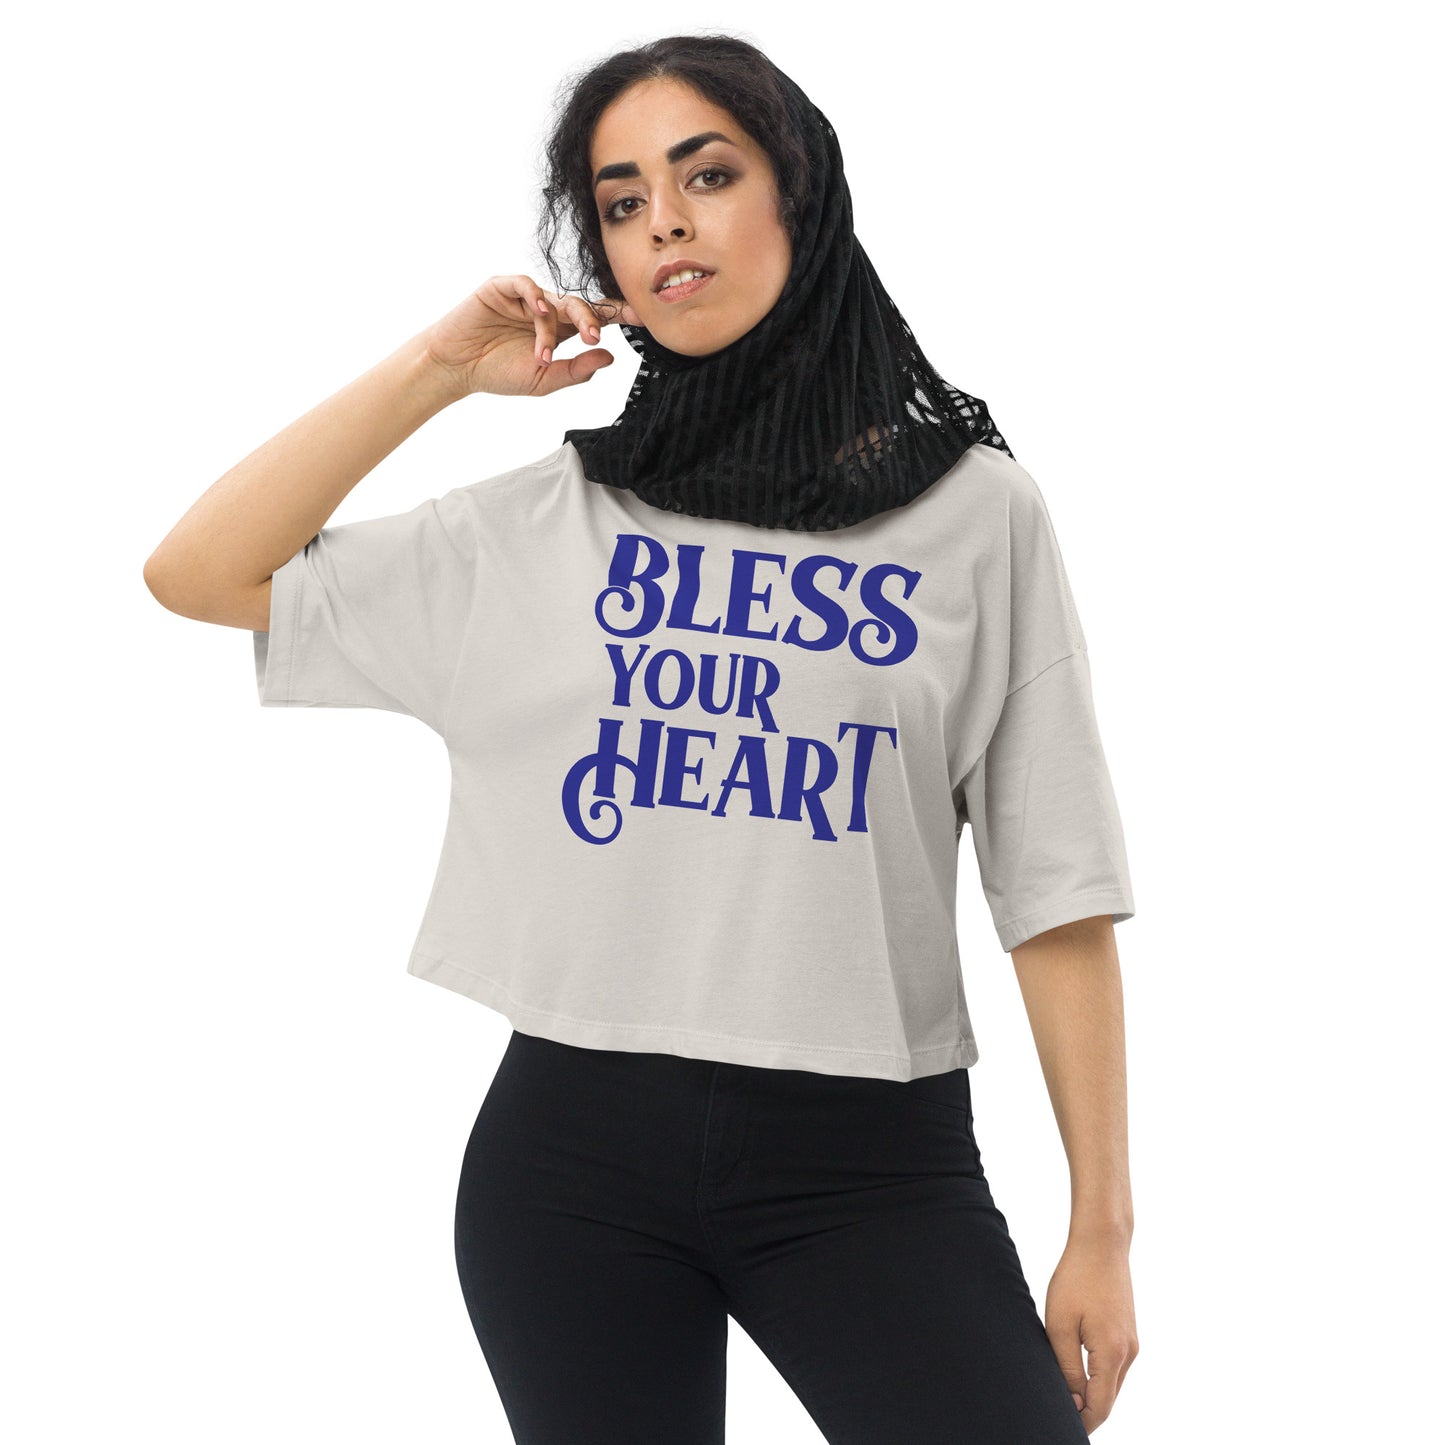 Bless Your Heart / Loose Crop Top